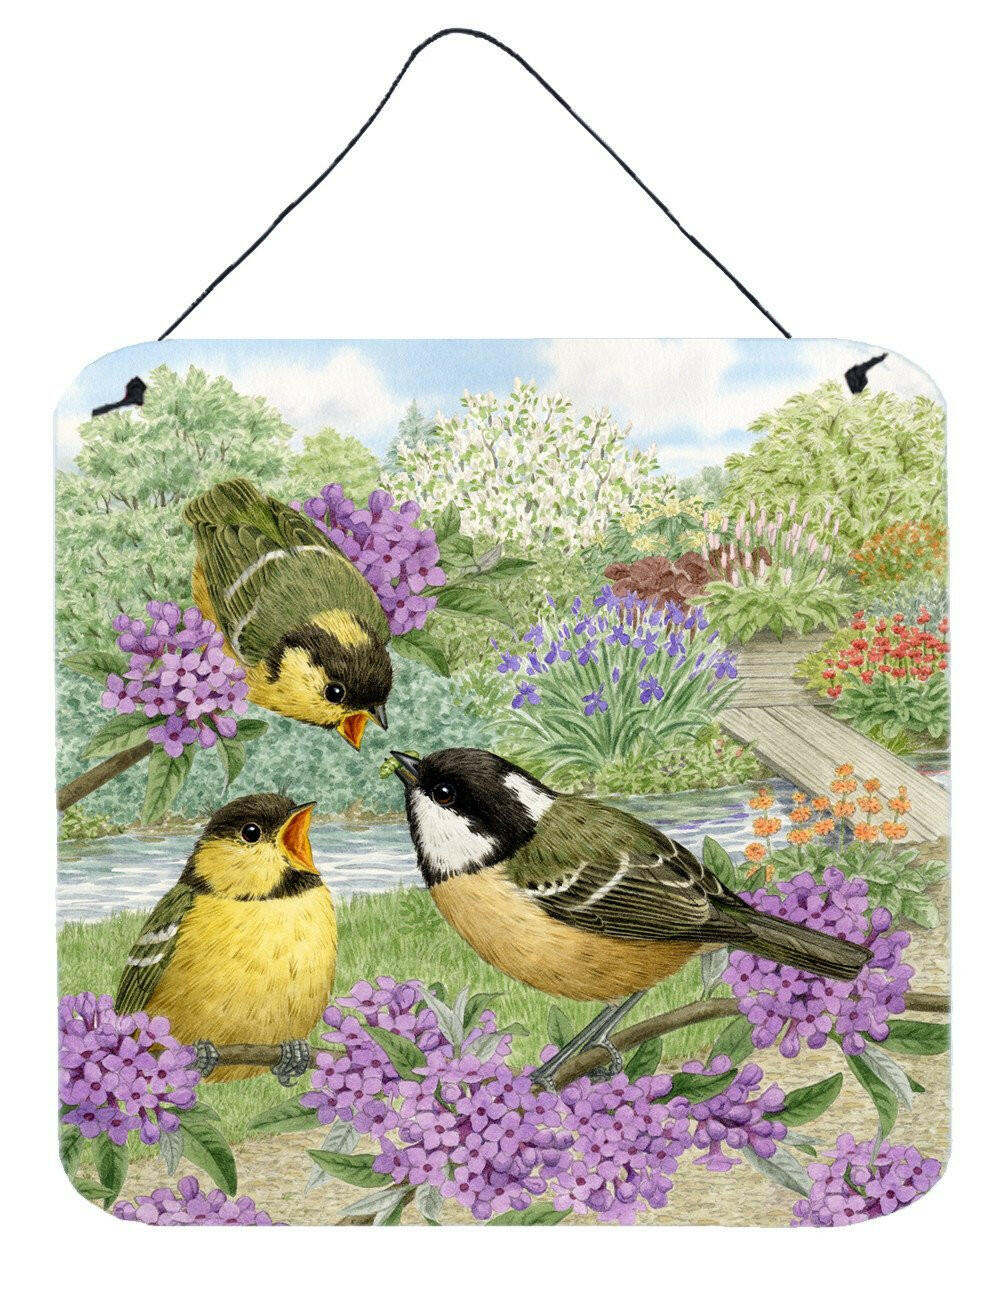 Coal Tits Feeding Time Wall or Door Hanging Prints ASAD0686DS66 by Caroline's Treasures